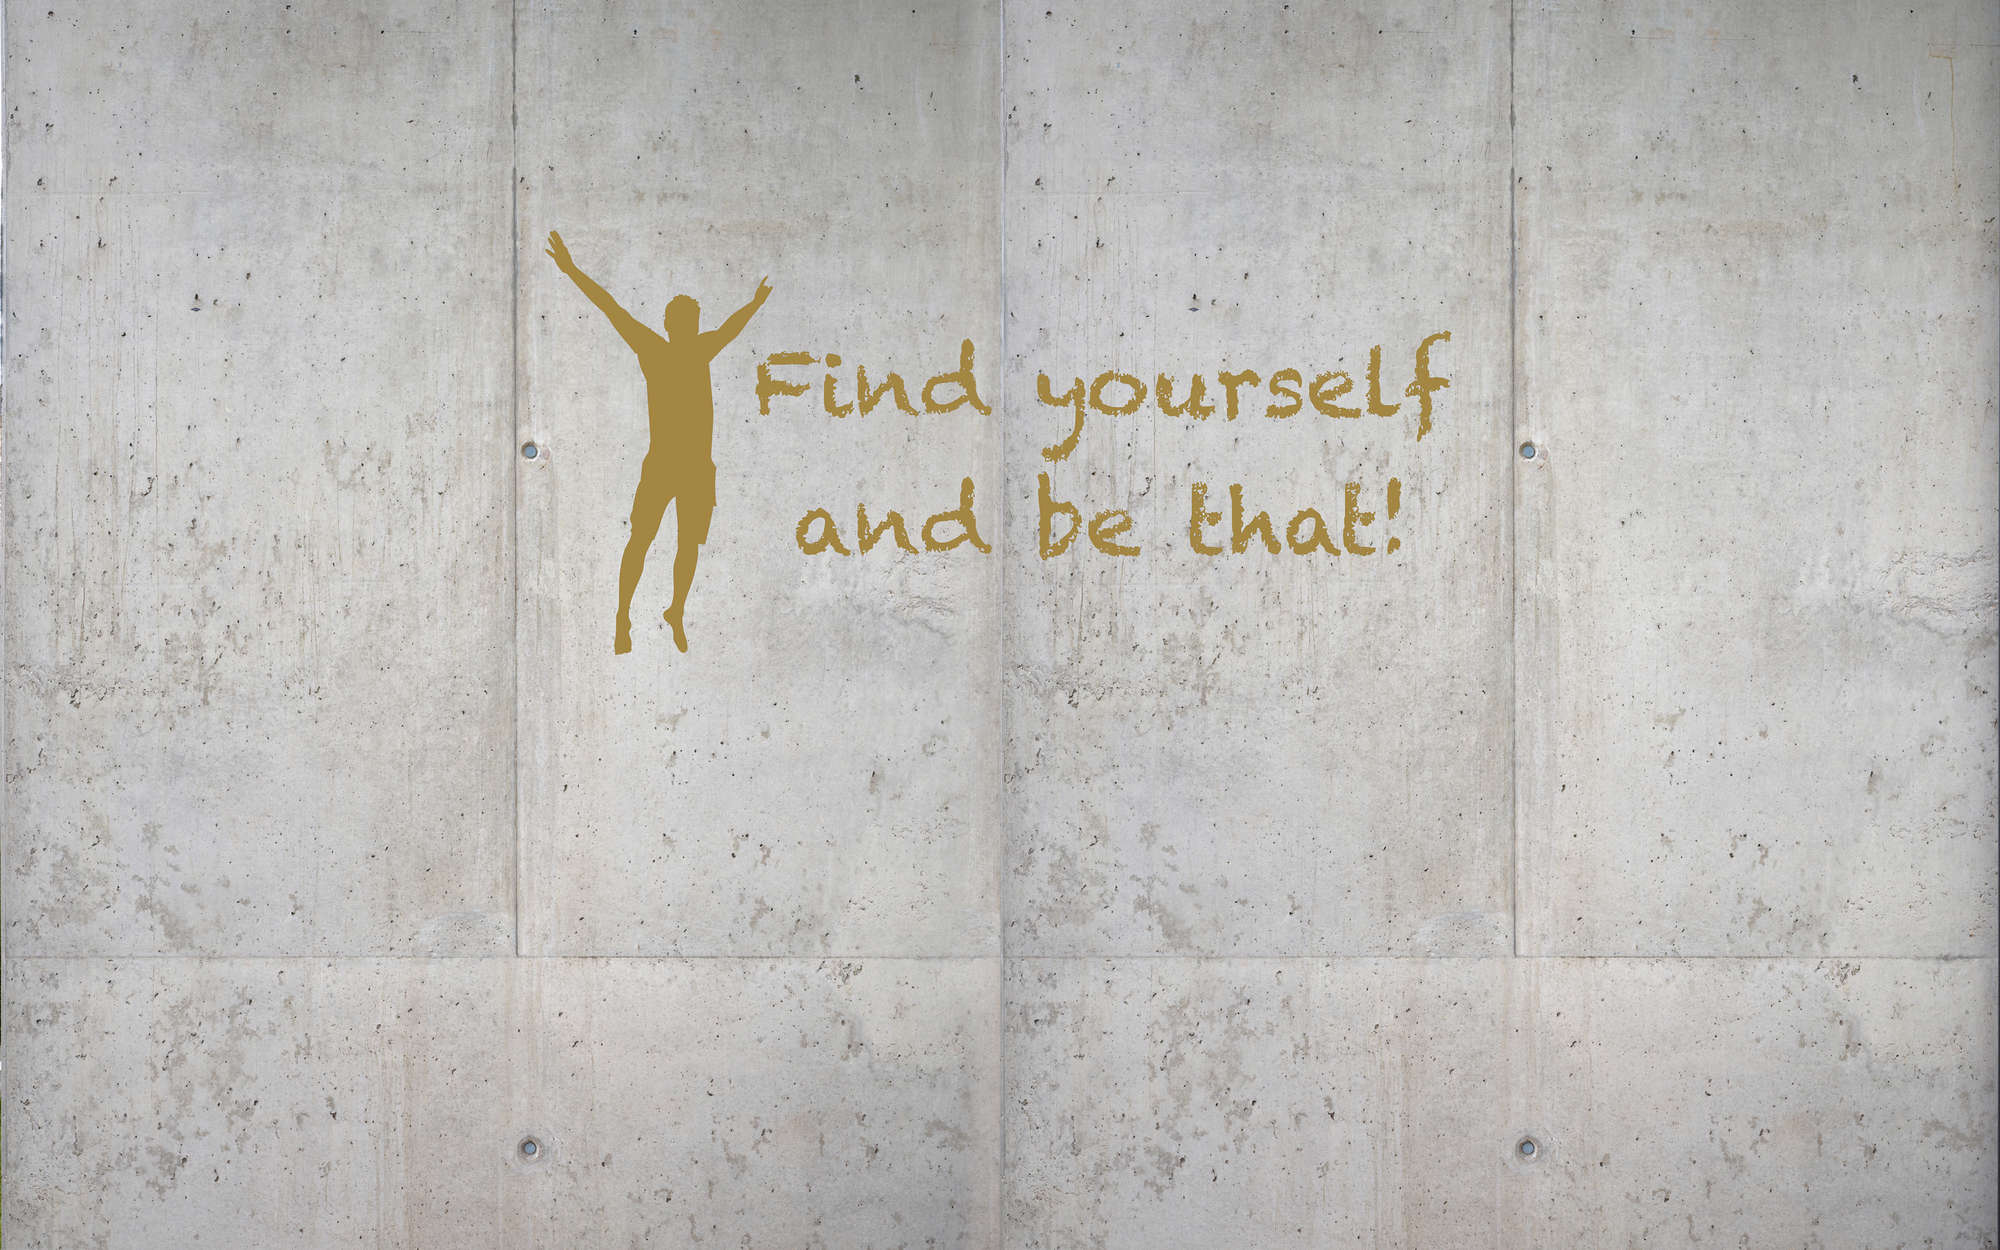             Concrete wall mural with lettering - Matt smooth fleece
        